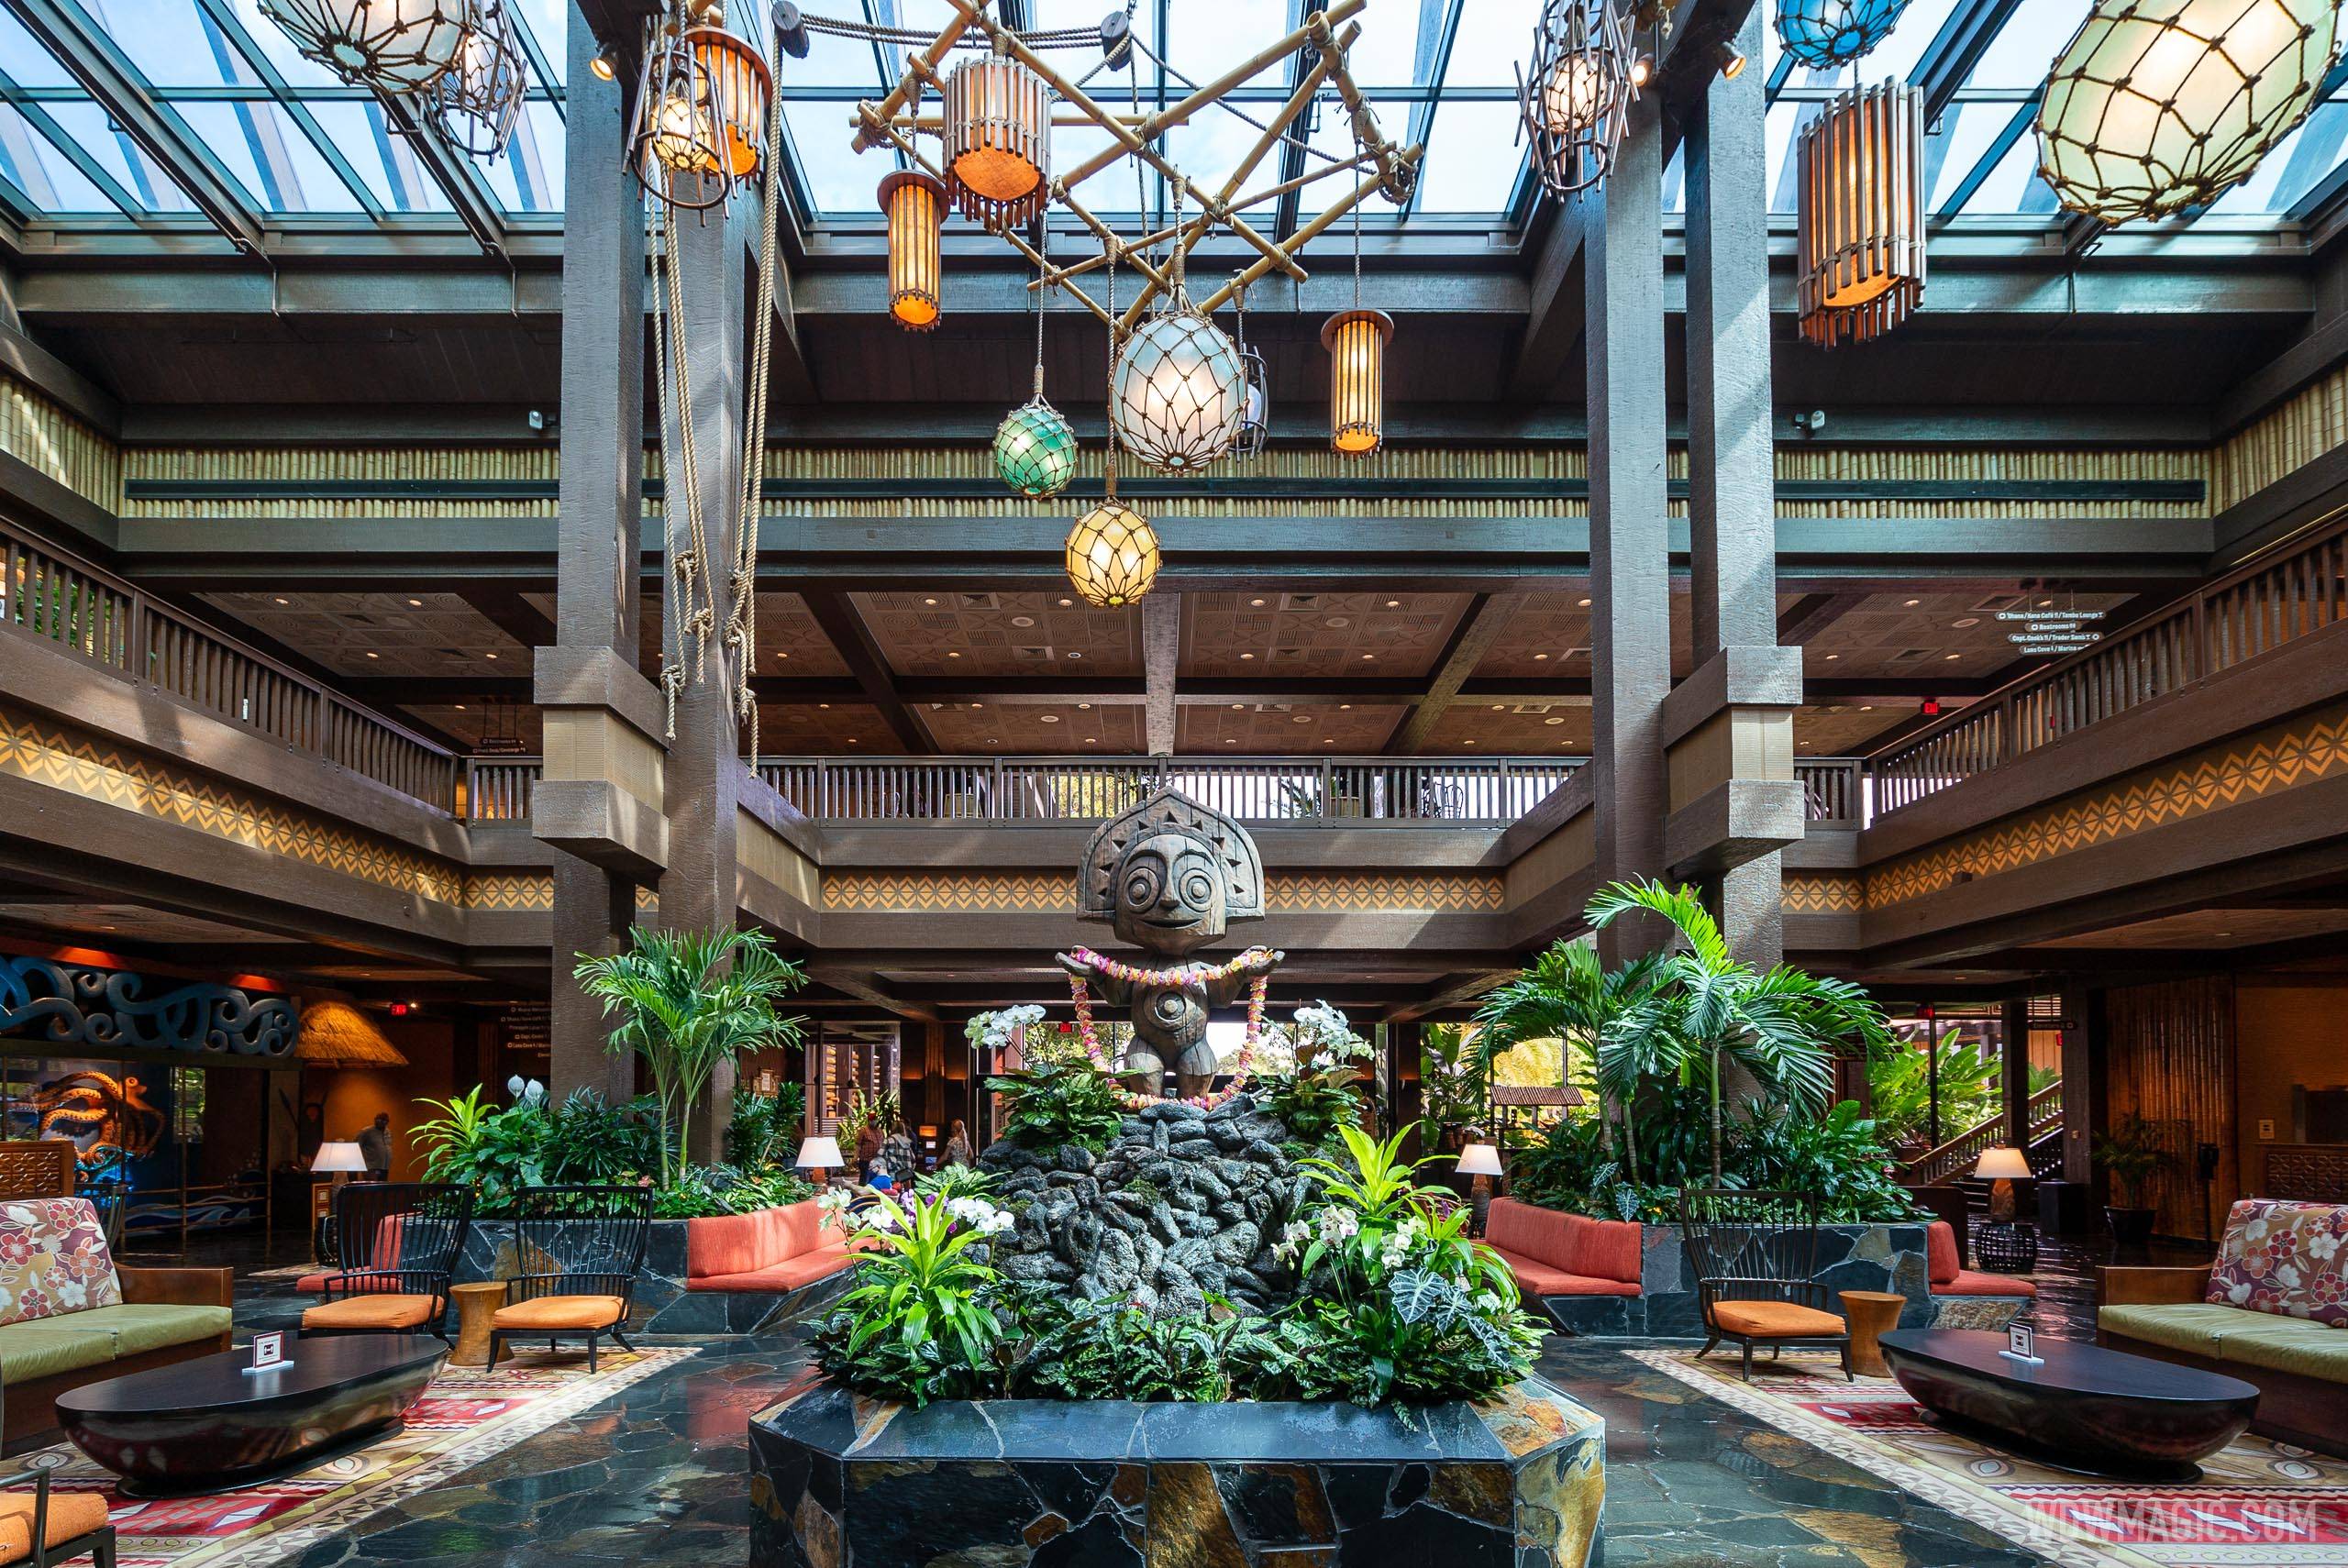 Changes are coming to Disney's Polynesian Resort ahead of its summer 2021 reopening